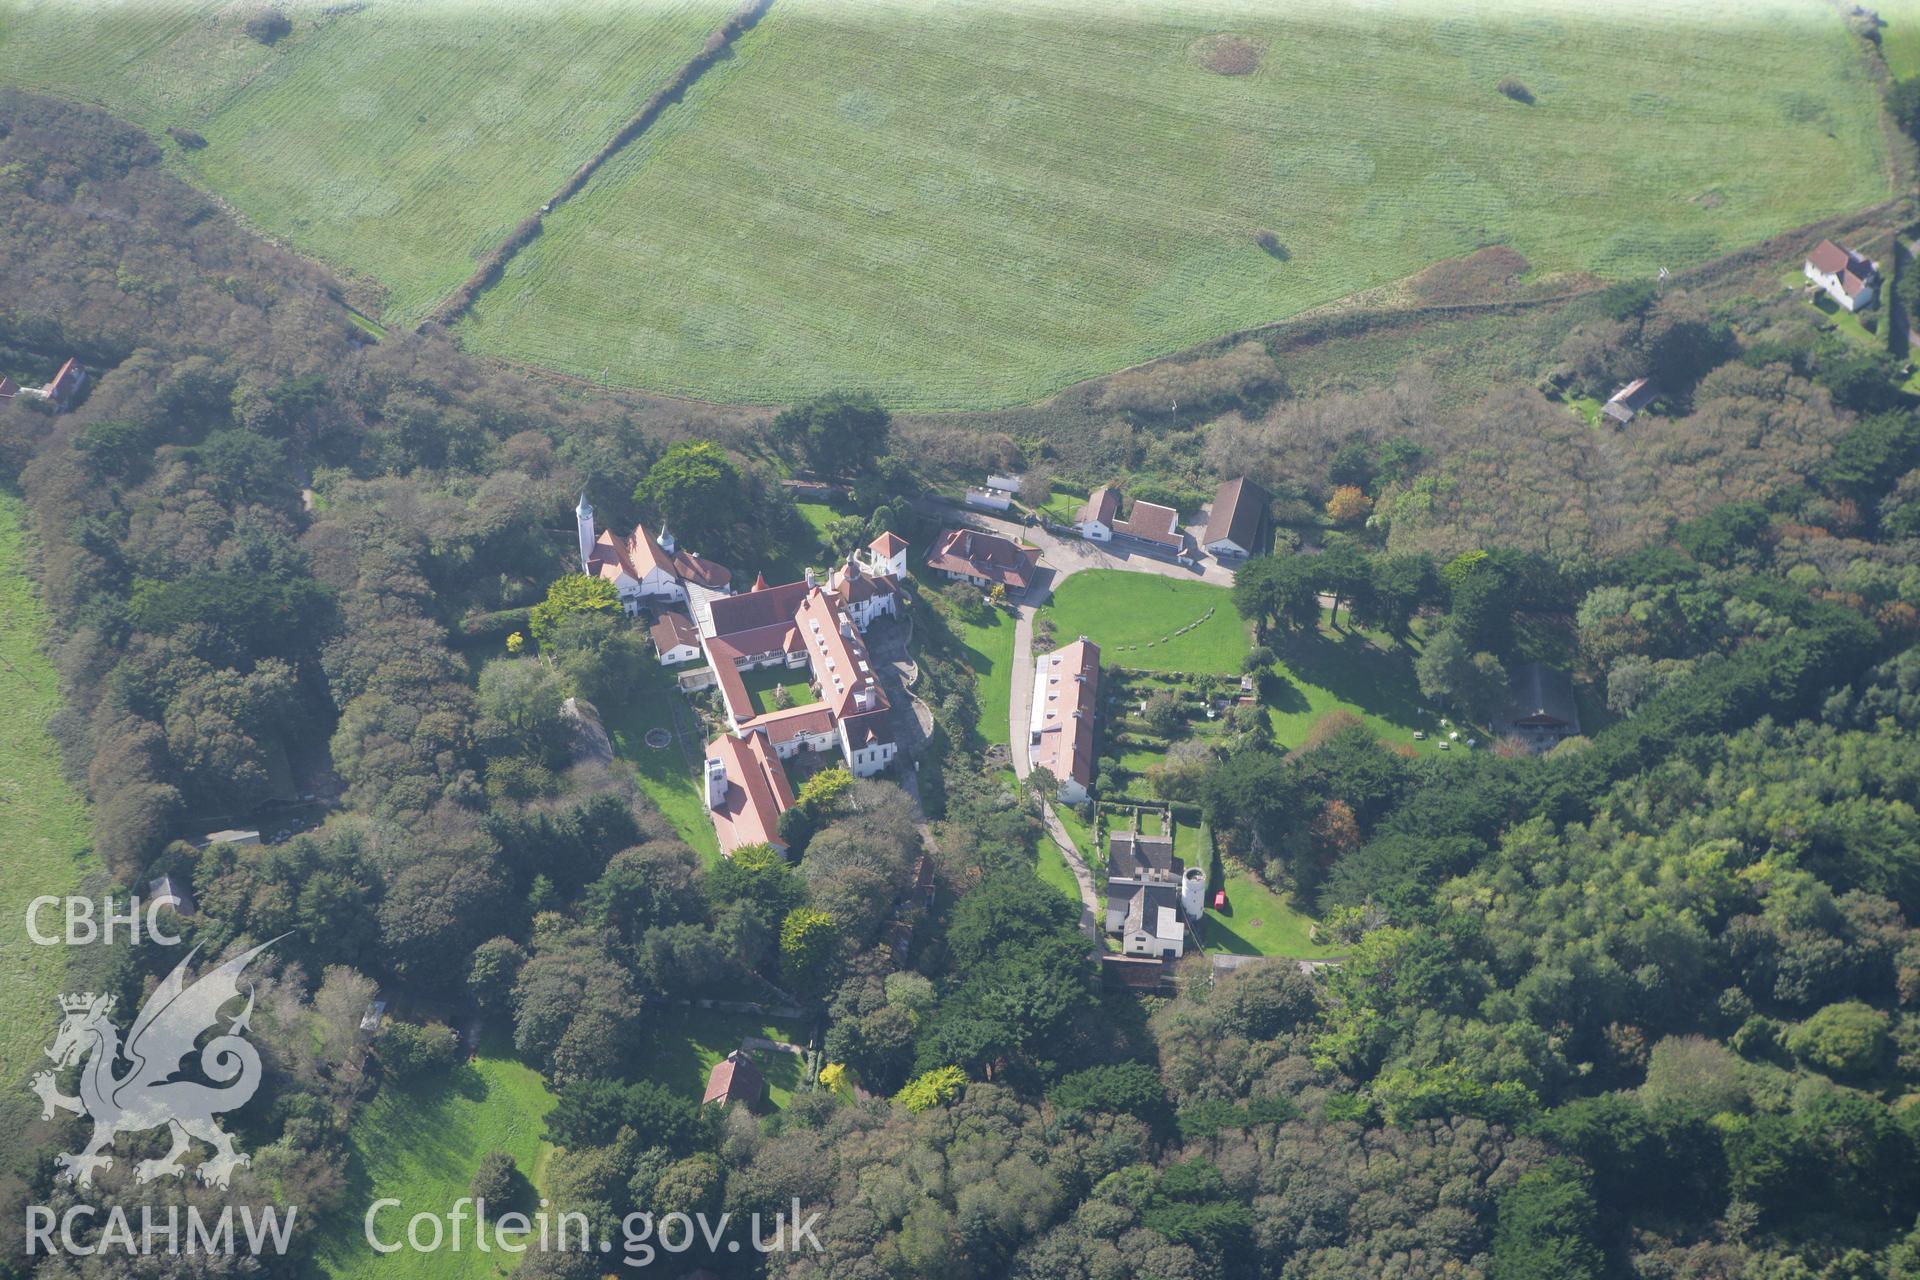 RCAHMW colour oblique photograph of Caldey Monastery, Caldey Island, viewed from the east. Taken by Toby Driver and Oliver Davies on 28/09/2011.